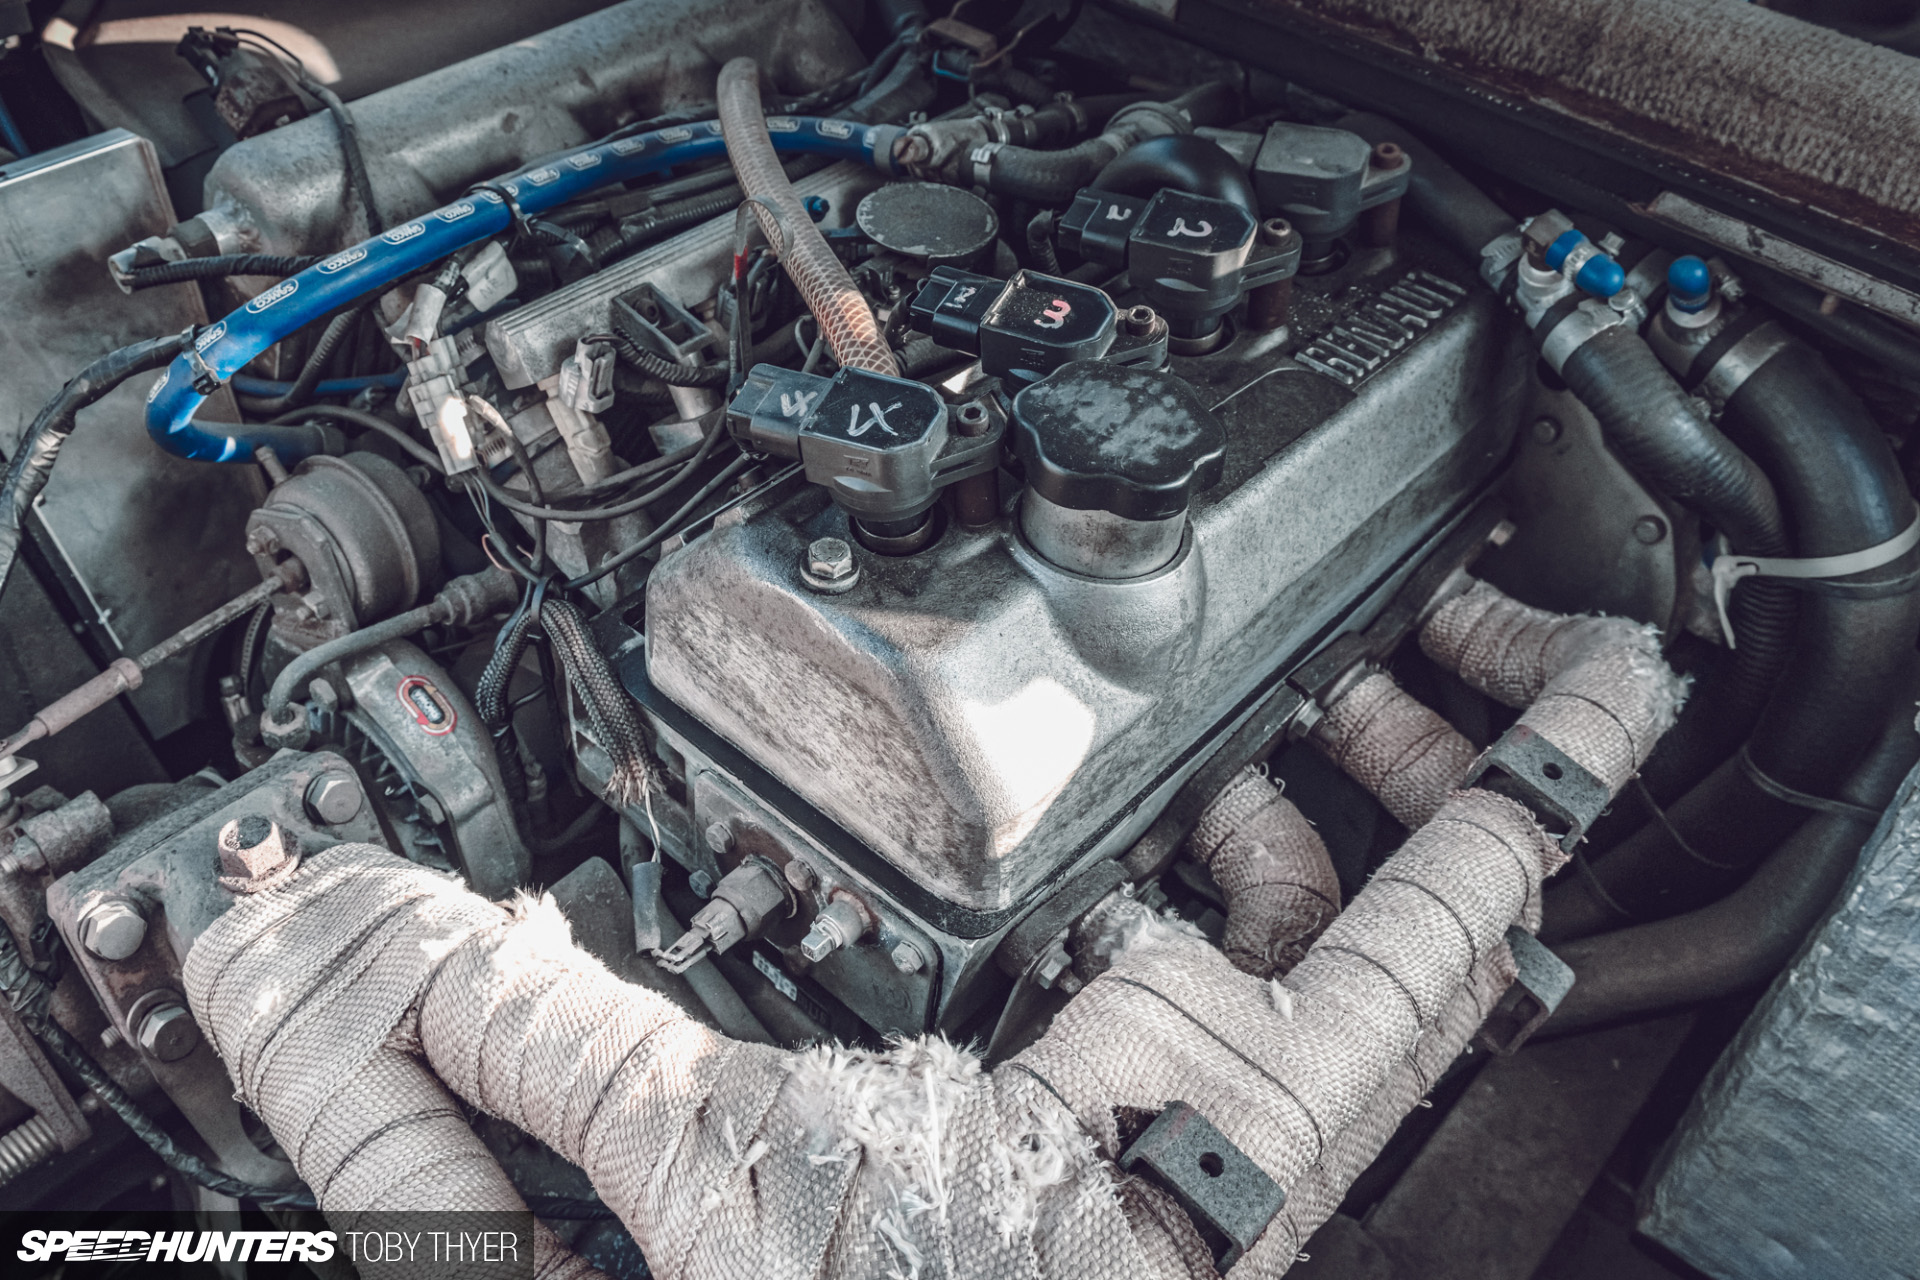 How Cool Is This R5 Turbo Resto Project? - Speedhunters